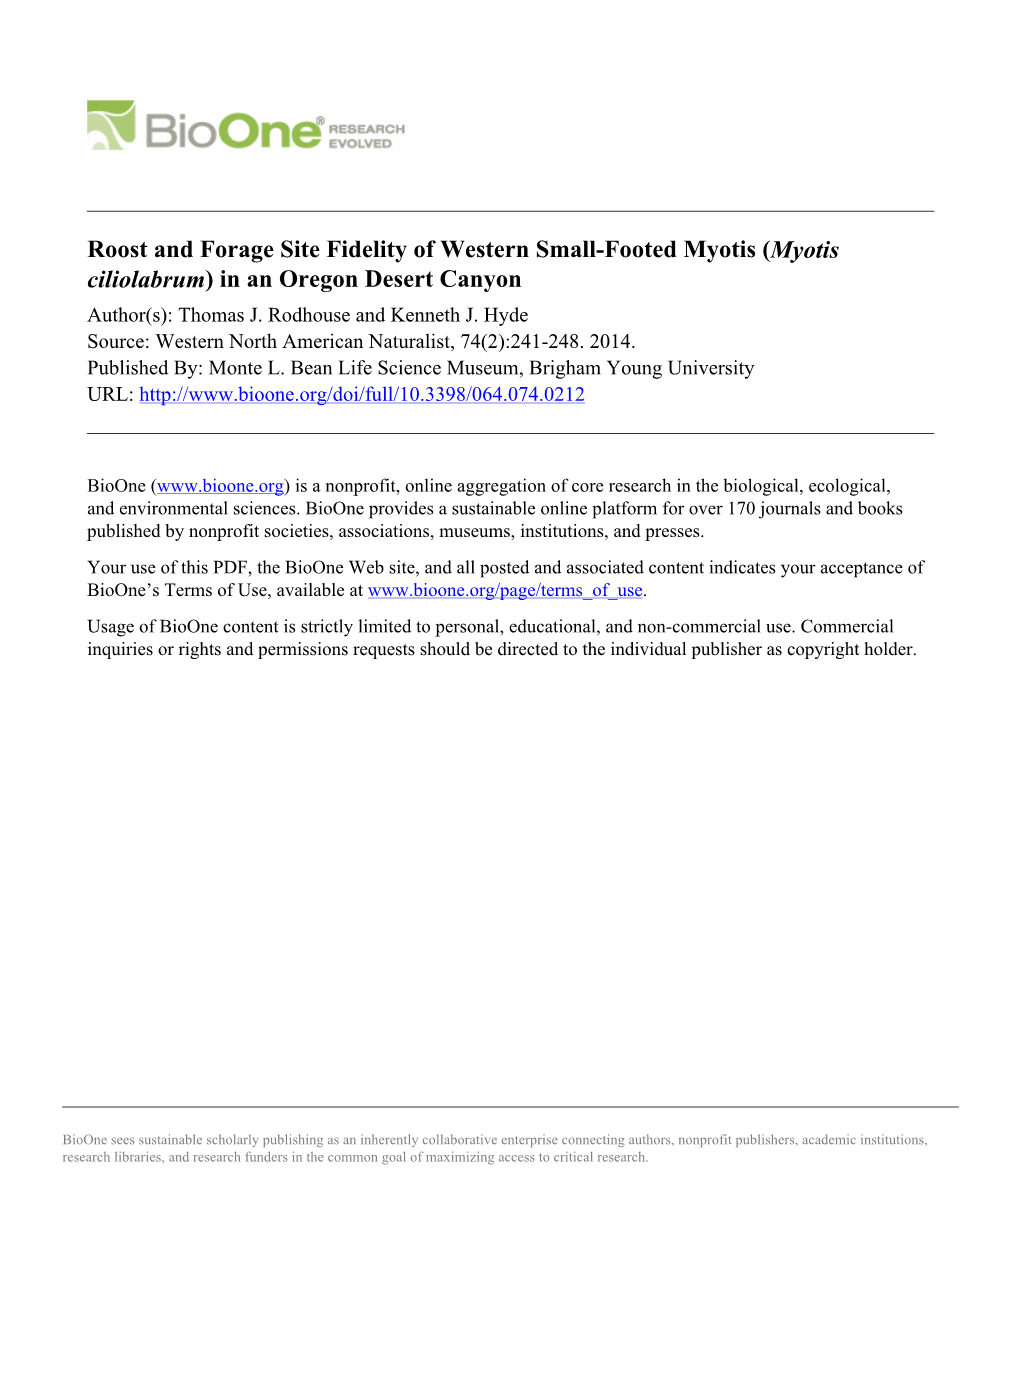 Roost and Forage Site Fidelity of Western Small-Footed Myotis (Myotis Ciliolabrum) in an Oregon Desert Canyon Author(S): Thomas J